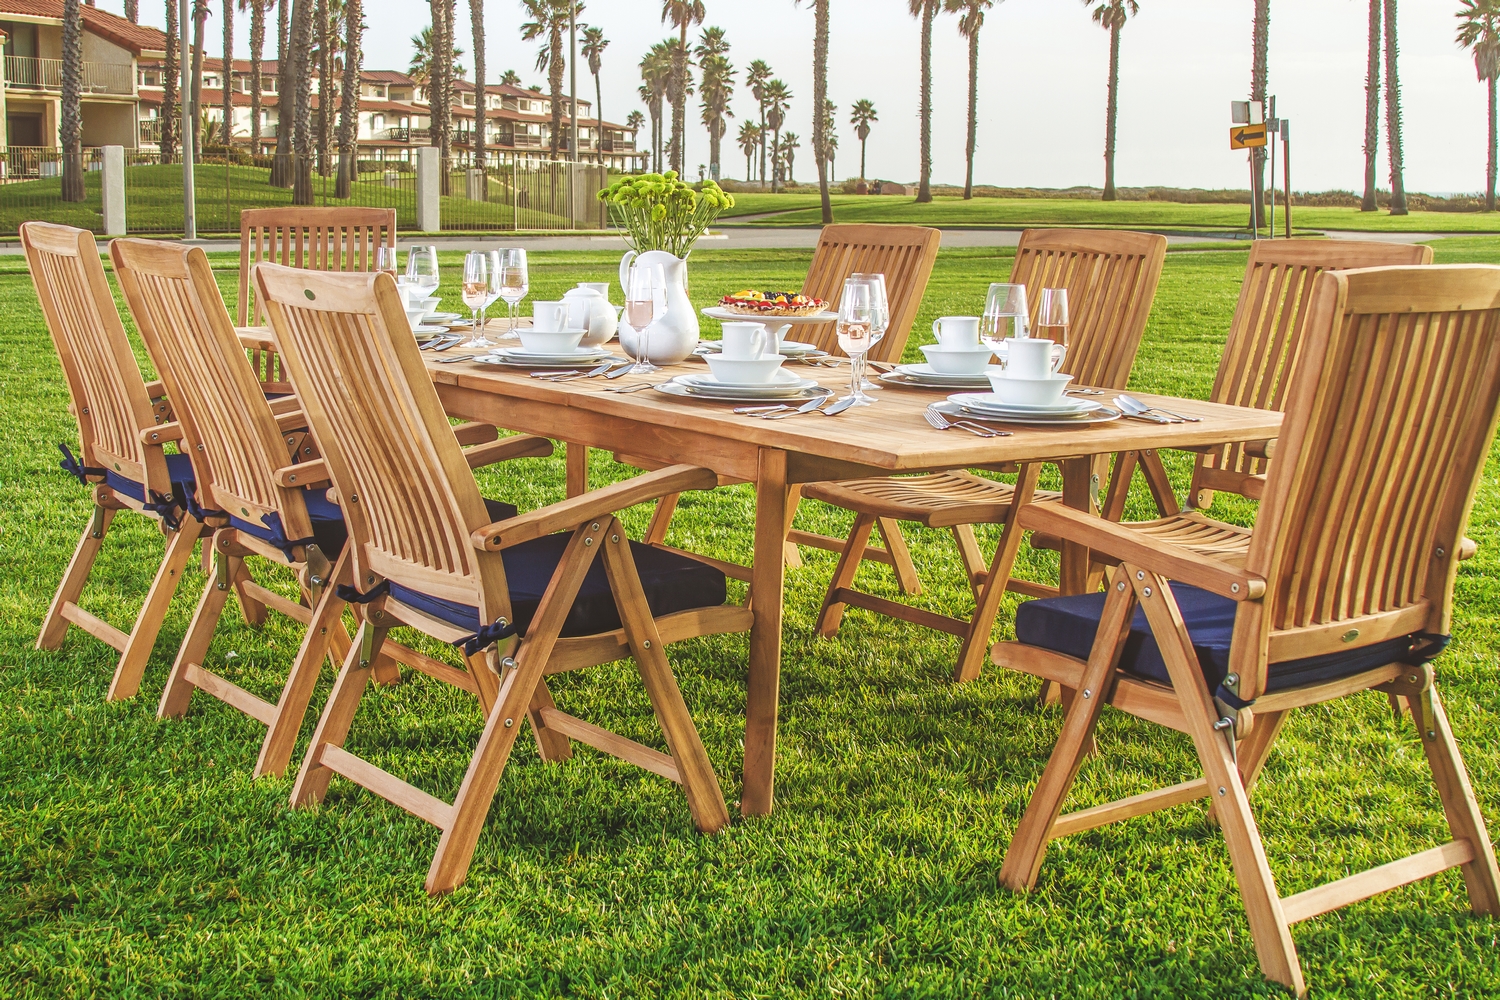 Teak Dining Set:8 Seater 9 Pc - 94" Rectangle Table And 8 Marley Reclining Arm Chairs Outdoor Patio Grade-A Teak Wood WholesaleTeak #WMDSMRc - image 1 of 3